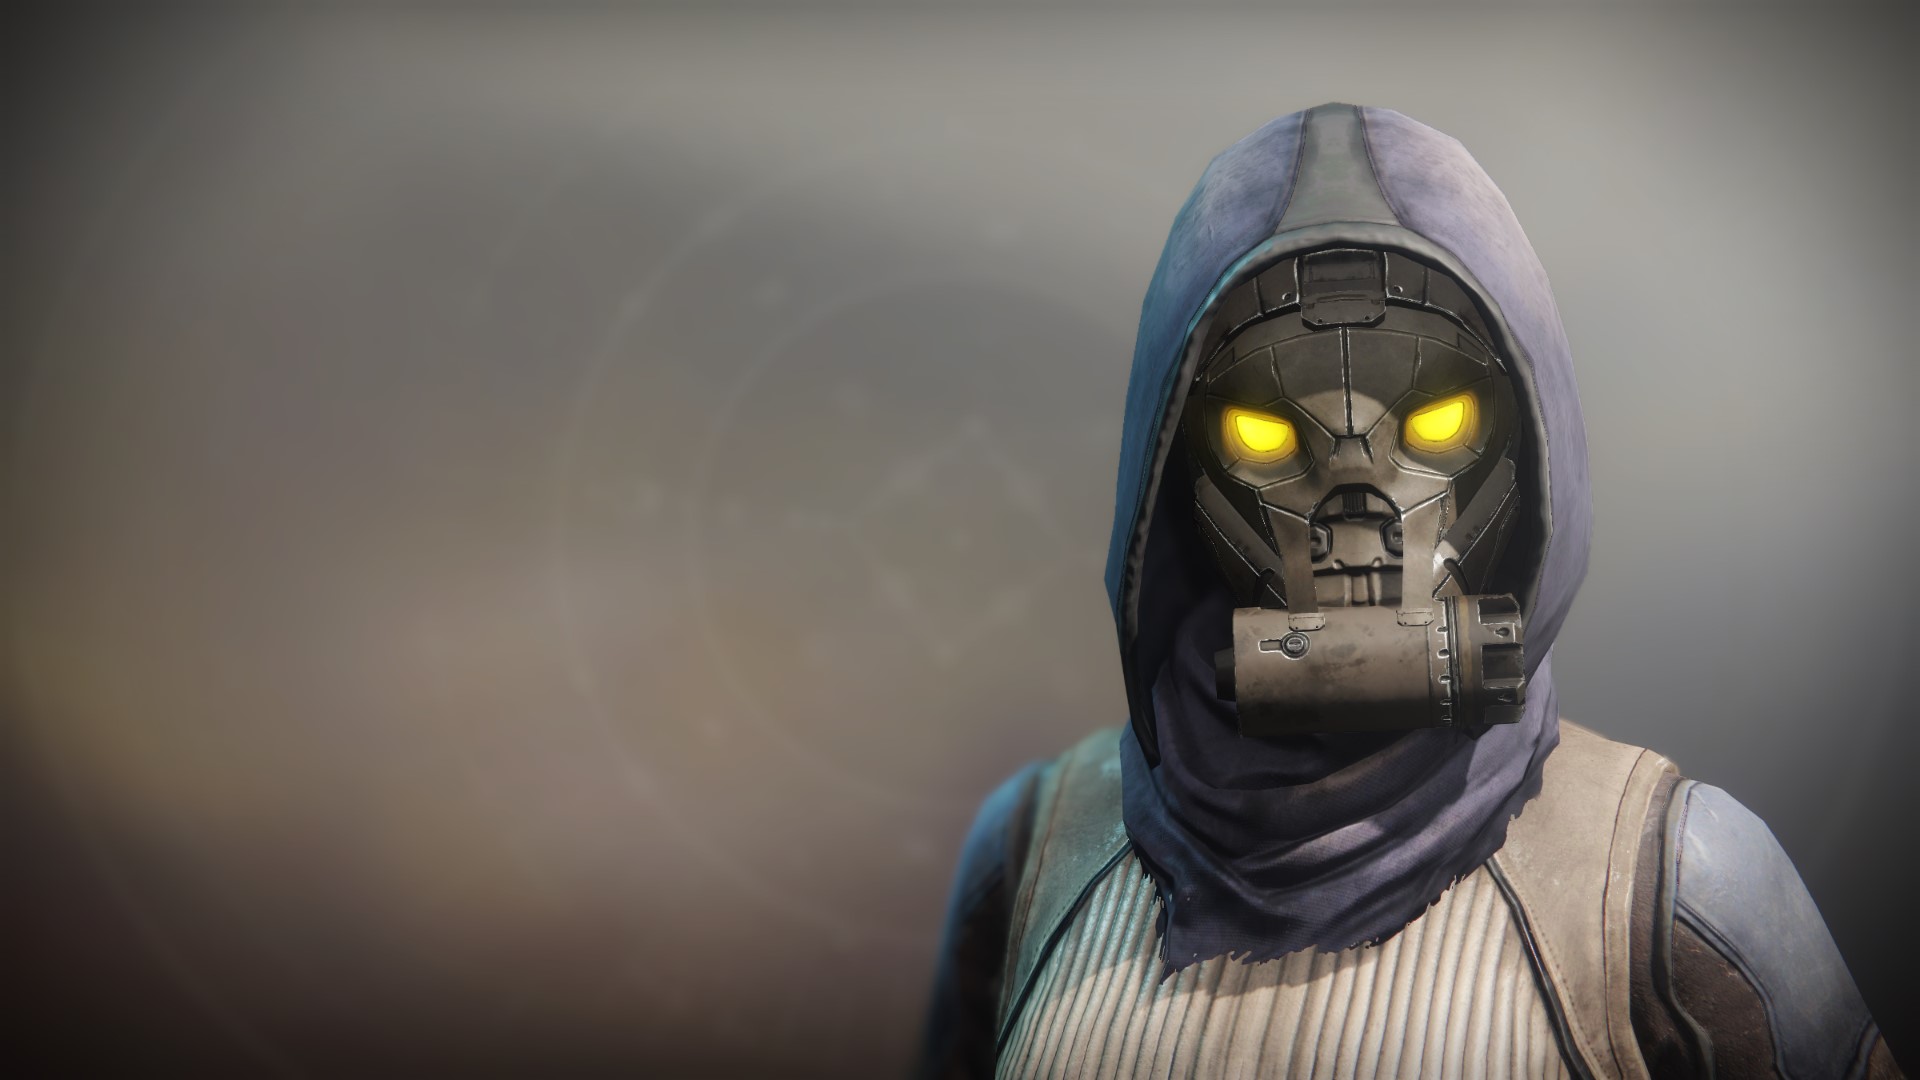 An in-game render of the Prodigal Mask.